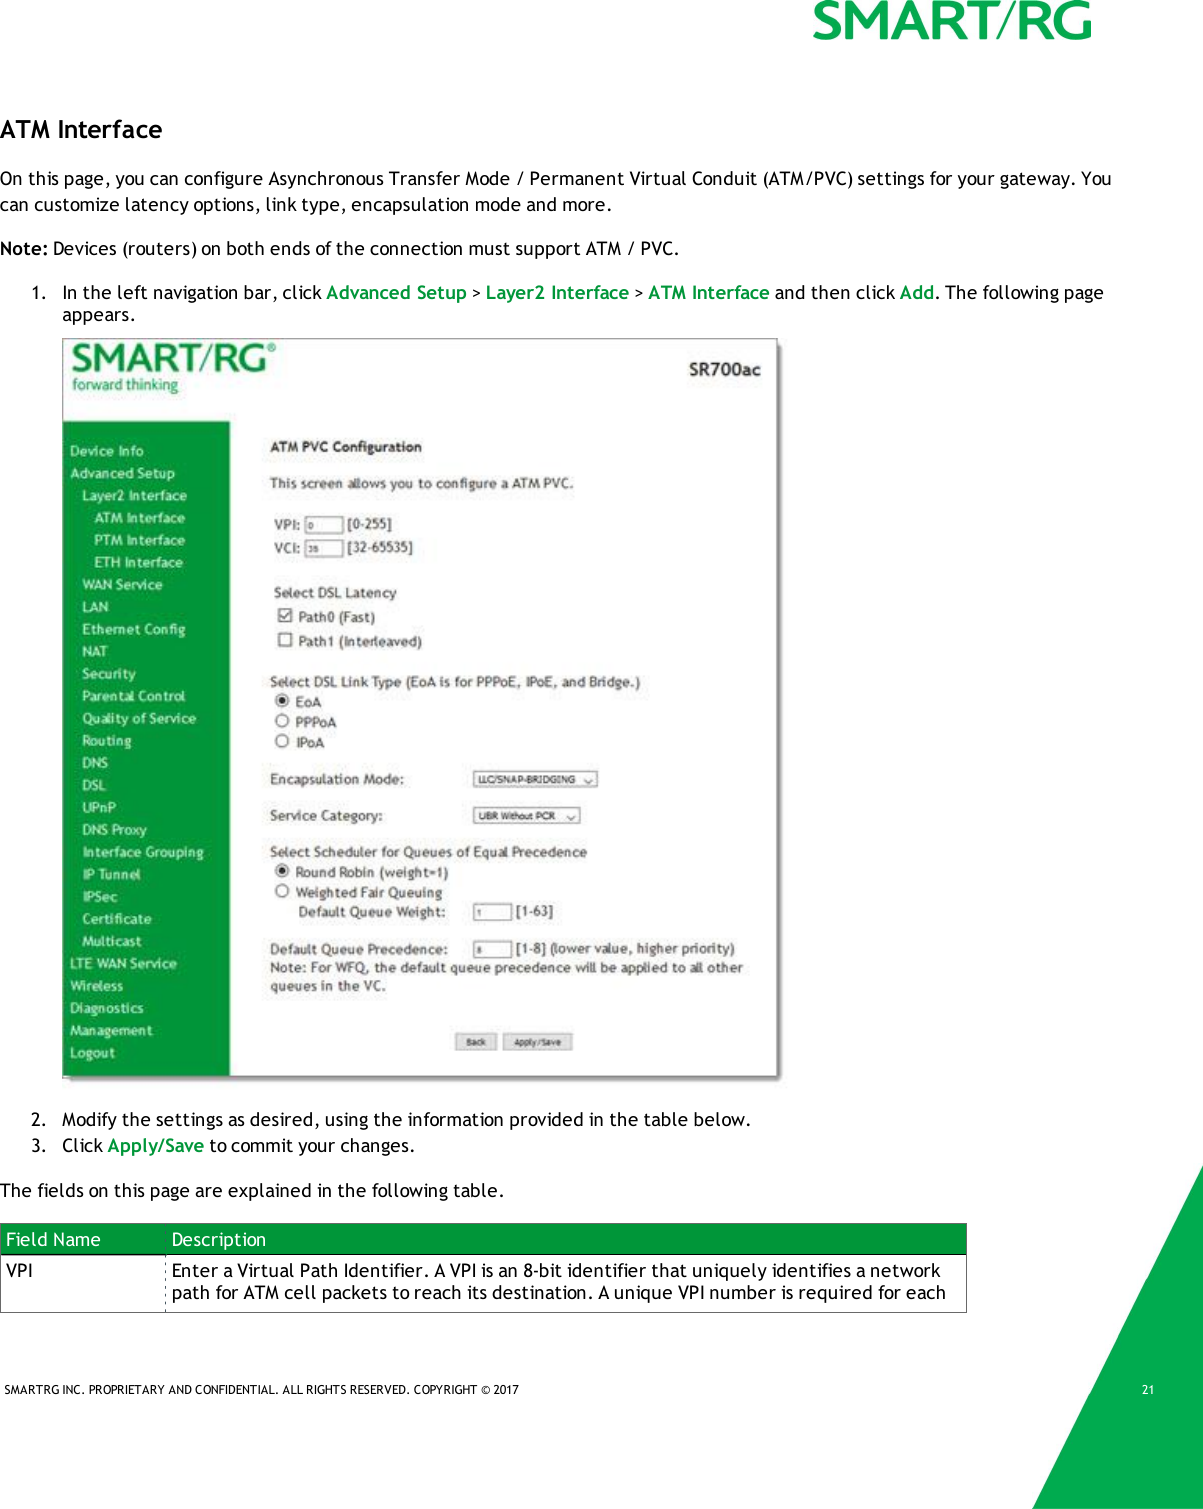 SMARTRG INC. PROPRIETARY AND CONFIDENTIAL. ALL RIGHTS RESERVED. COPYRIGHT © 2017 21ATM InterfaceOn this page, you can configure Asynchronous Transfer Mode / Permanent Virtual Conduit (ATM/PVC) settings for your gateway. Youcan customize latency options, link type, encapsulation mode and more.Note: Devices (routers) on both ends of the connection must support ATM / PVC.1. In the left navigation bar, click Advanced Setup &gt;Layer2 Interface &gt;ATM Interface and then click Add. The following pageappears.2. Modify the settings as desired, using the information provided in the table below.3. Click Apply/Save to commit your changes.The fields on this page are explained in the following table.Field Name DescriptionVPI Enter a Virtual Path Identifier. A VPI is an 8-bit identifier that uniquely identifies a networkpath for ATM cell packets to reach its destination. A unique VPI number is required for each